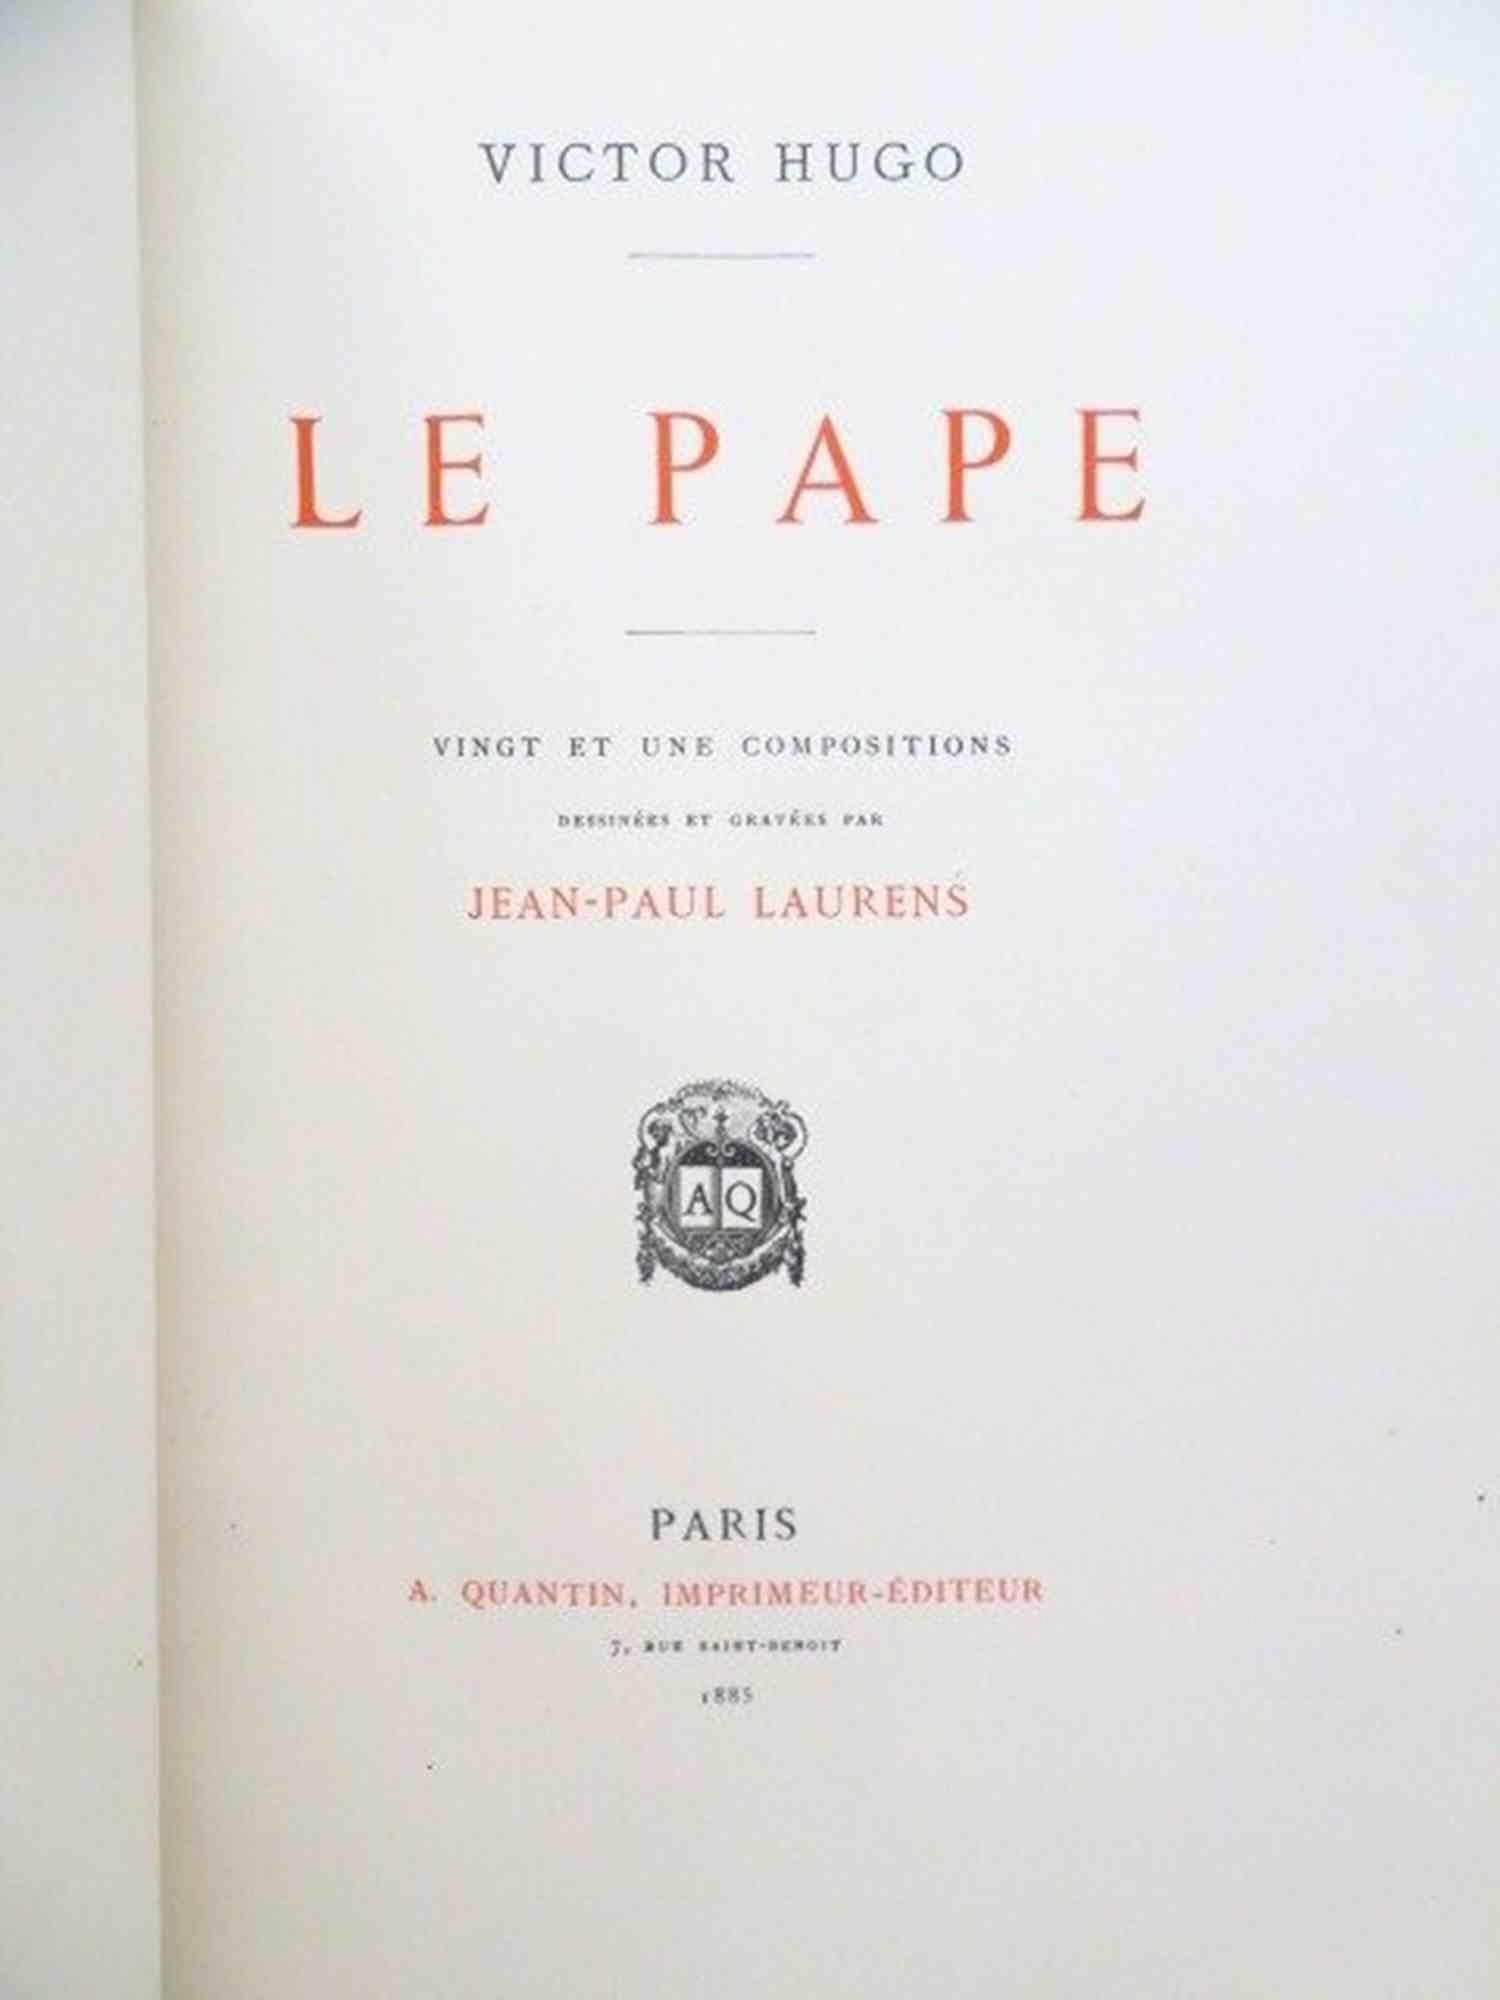 Le Pape is a rare book by Victor Hugo published in 1885.

Edited by Quantin – Paris

Original edition with the etchings by Jean Paul Laurens of 300 numbered copies (this is one of 100 on Whatman paper, n° 95) in a coeval half parchment binding.

In